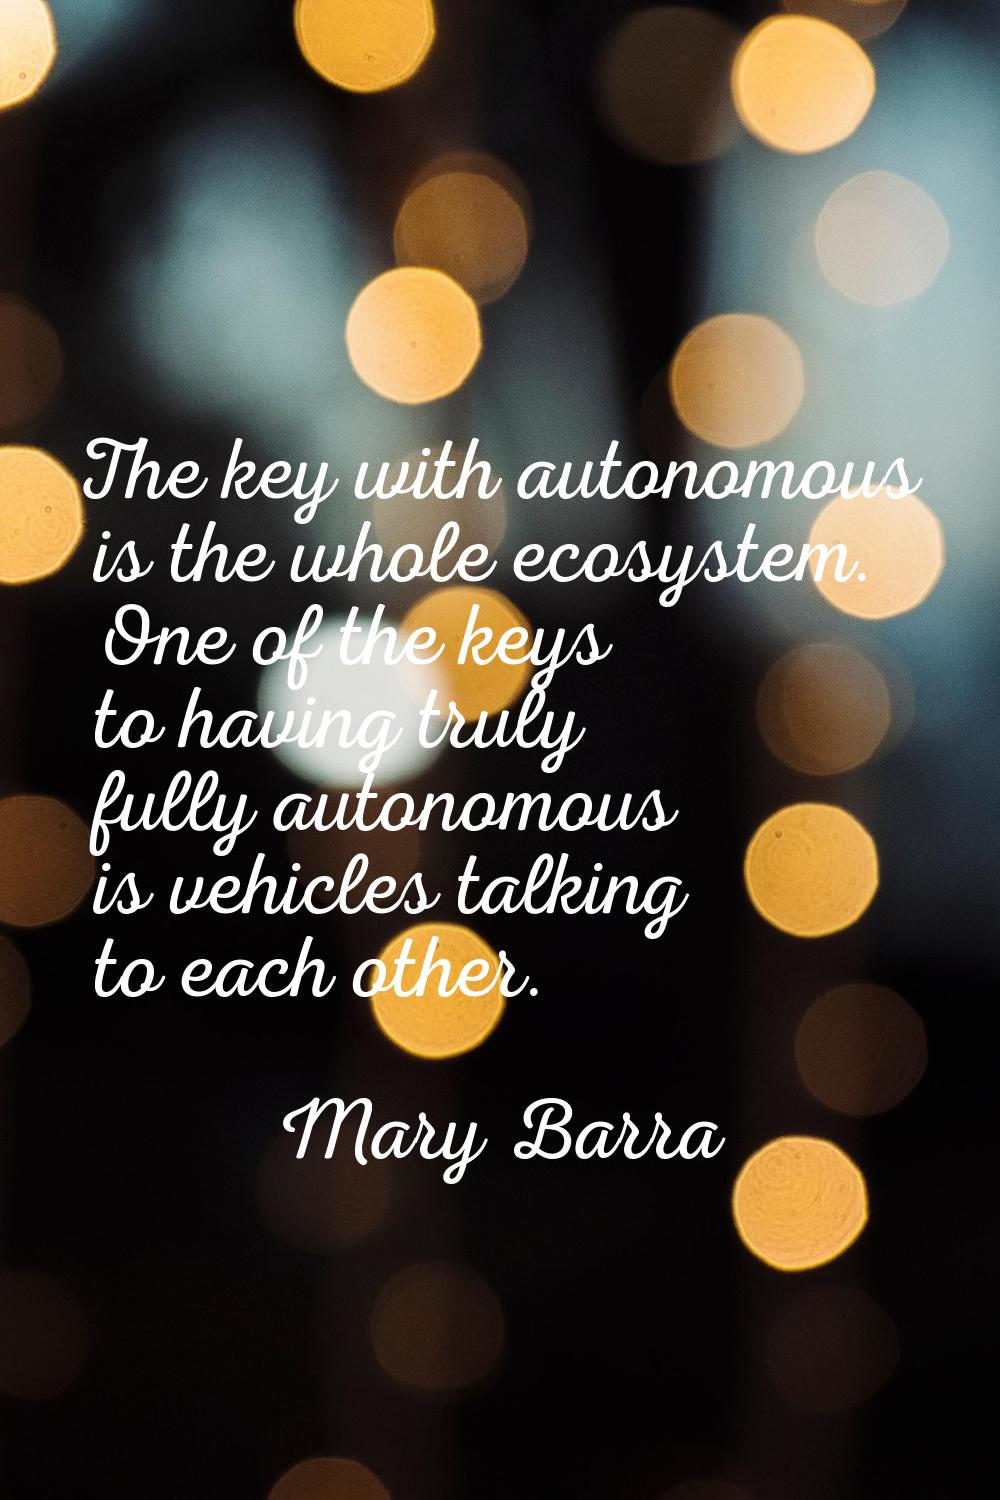 The key with autonomous is the whole ecosystem. One of the keys to having truly fully autonomous is